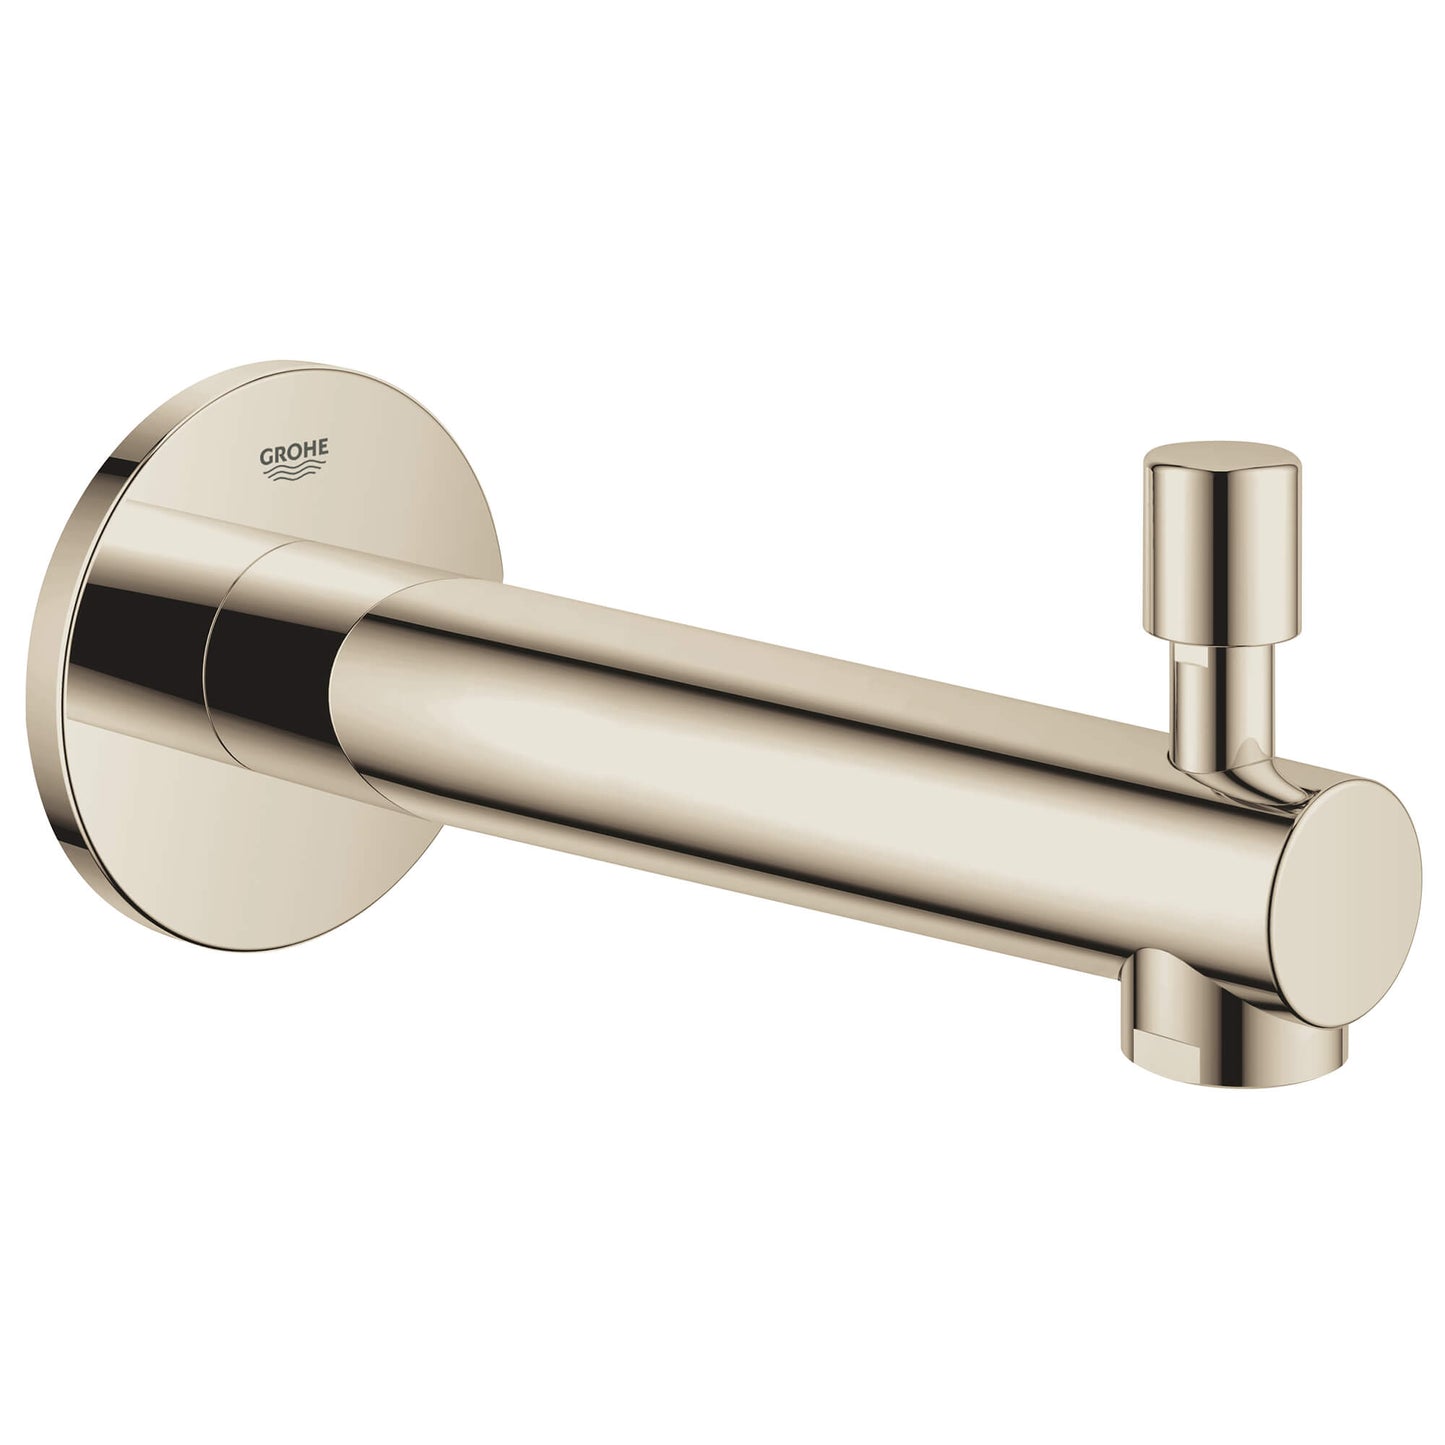 "CONCETTO" DIVERTER TUB SPOUT, POLISHED NICKEL